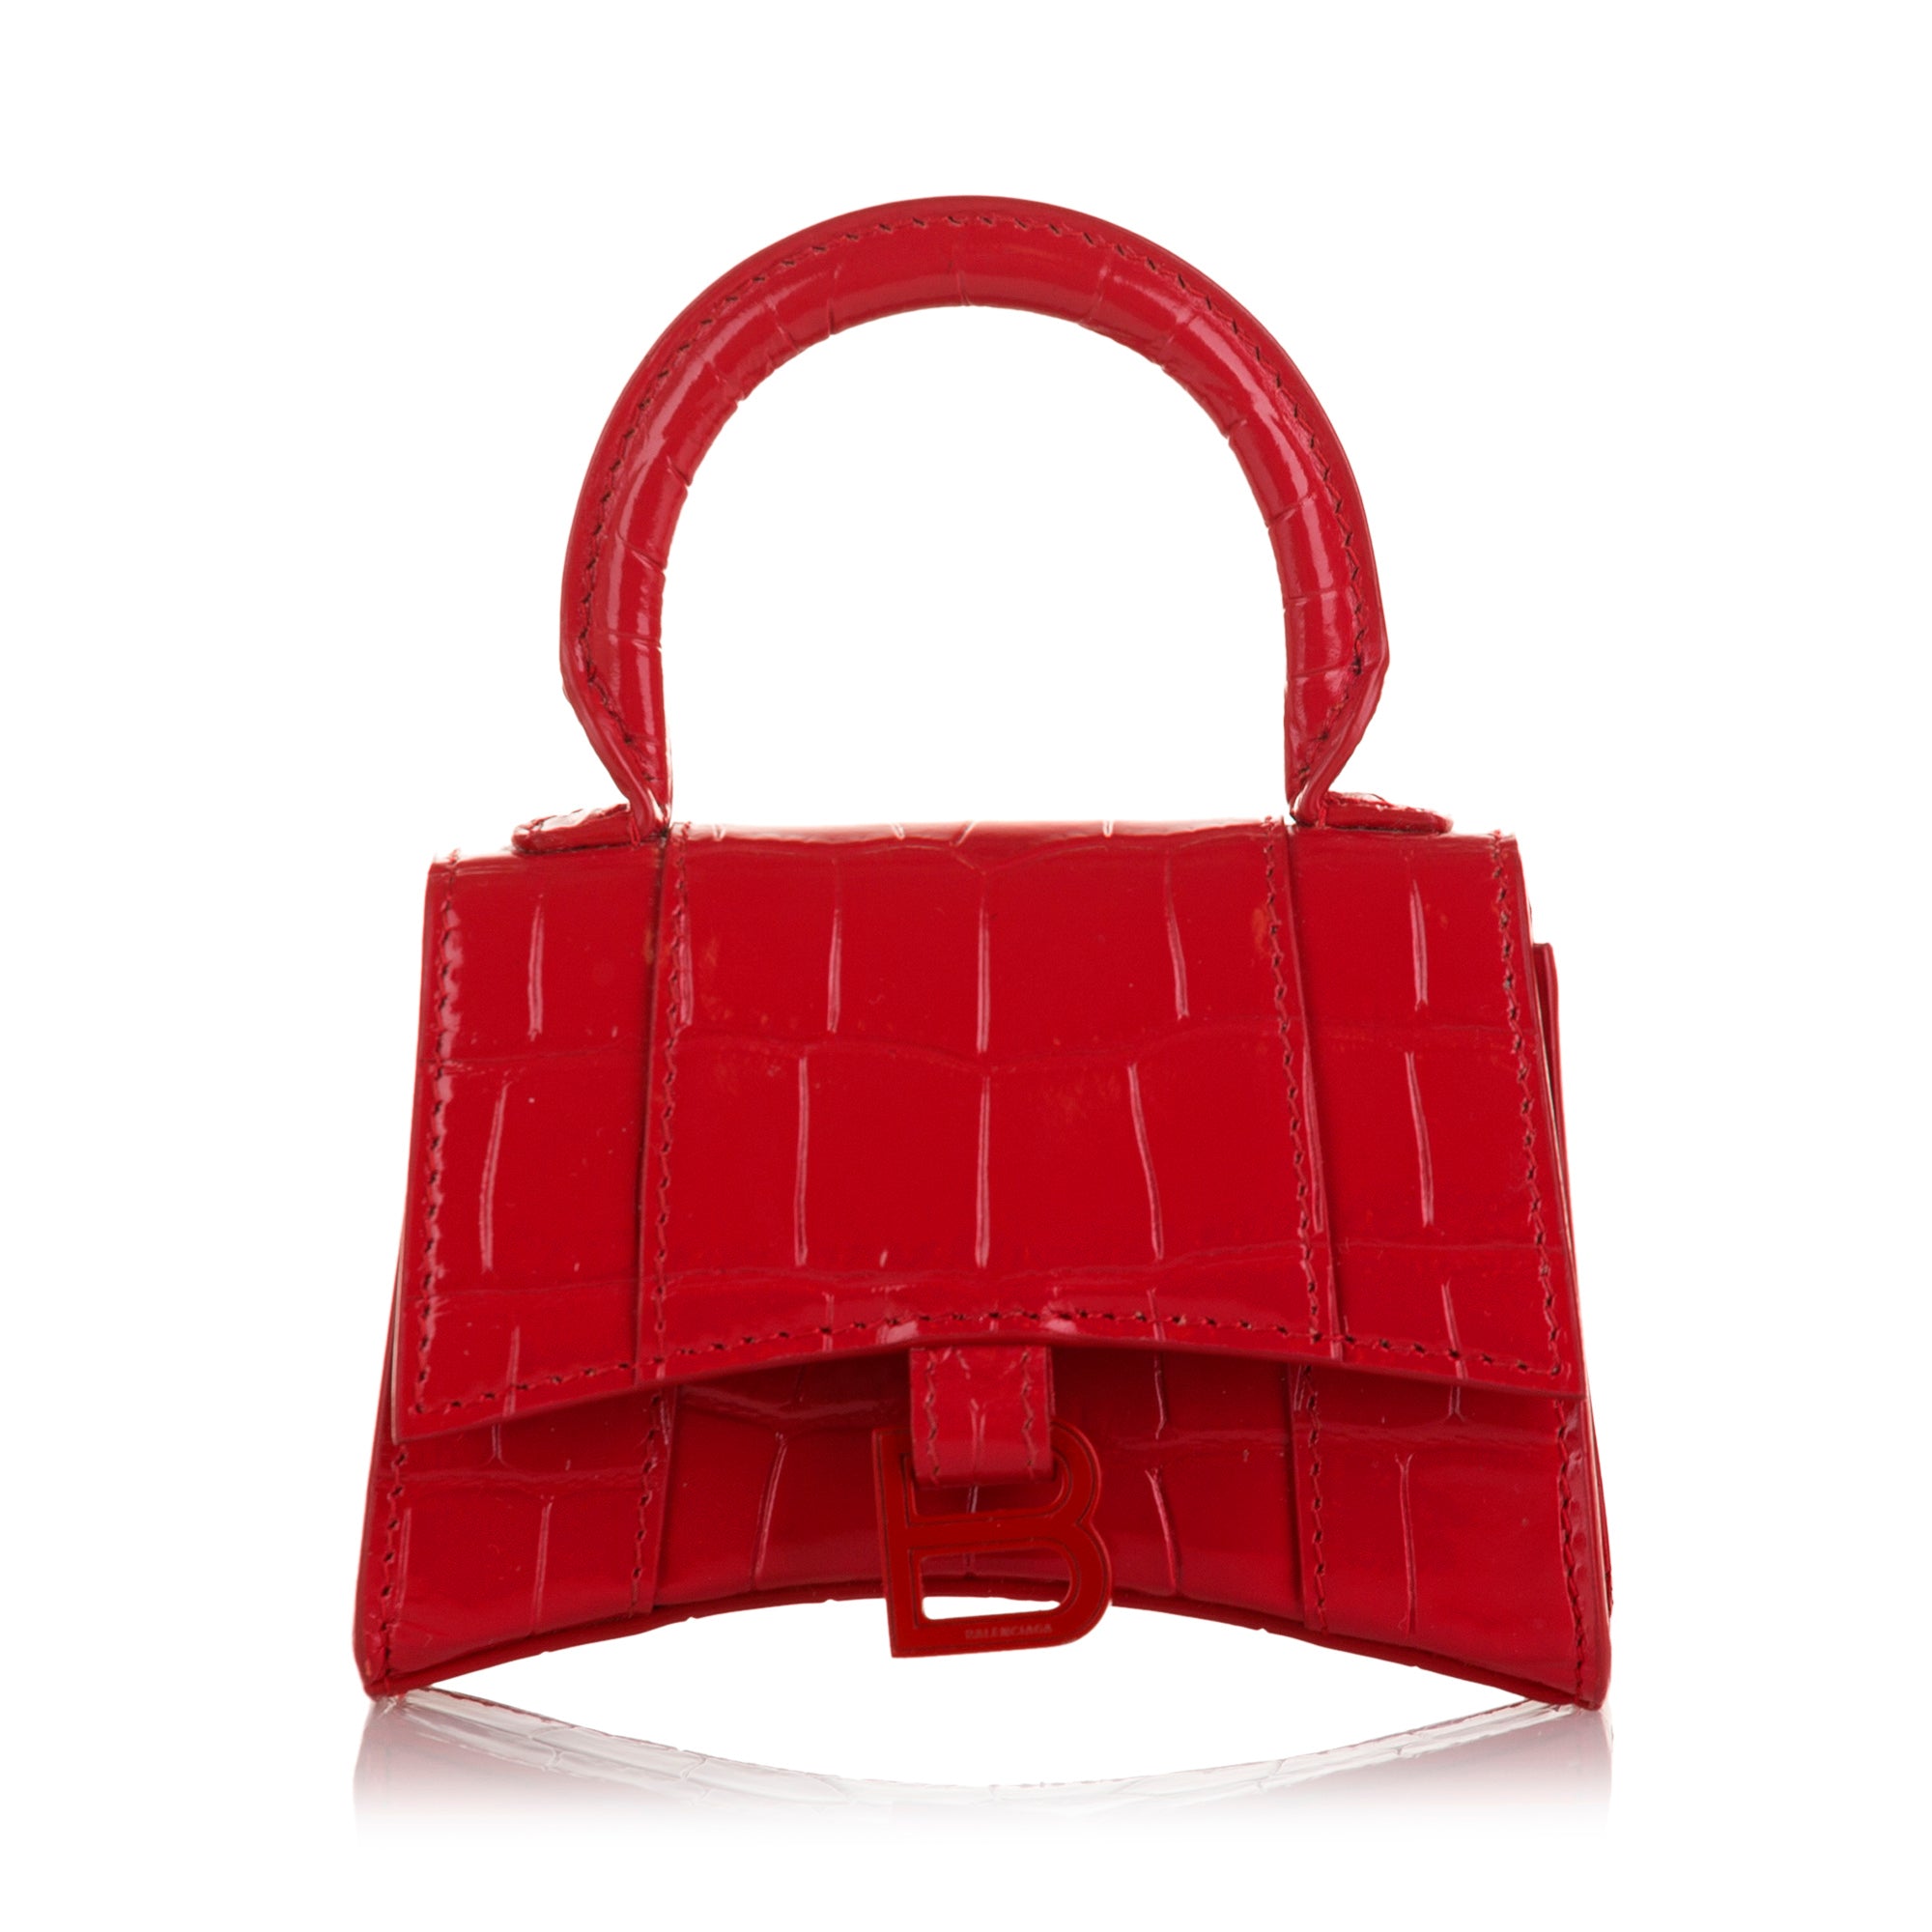 Balenciaga Hourglass Leather Bag in Red